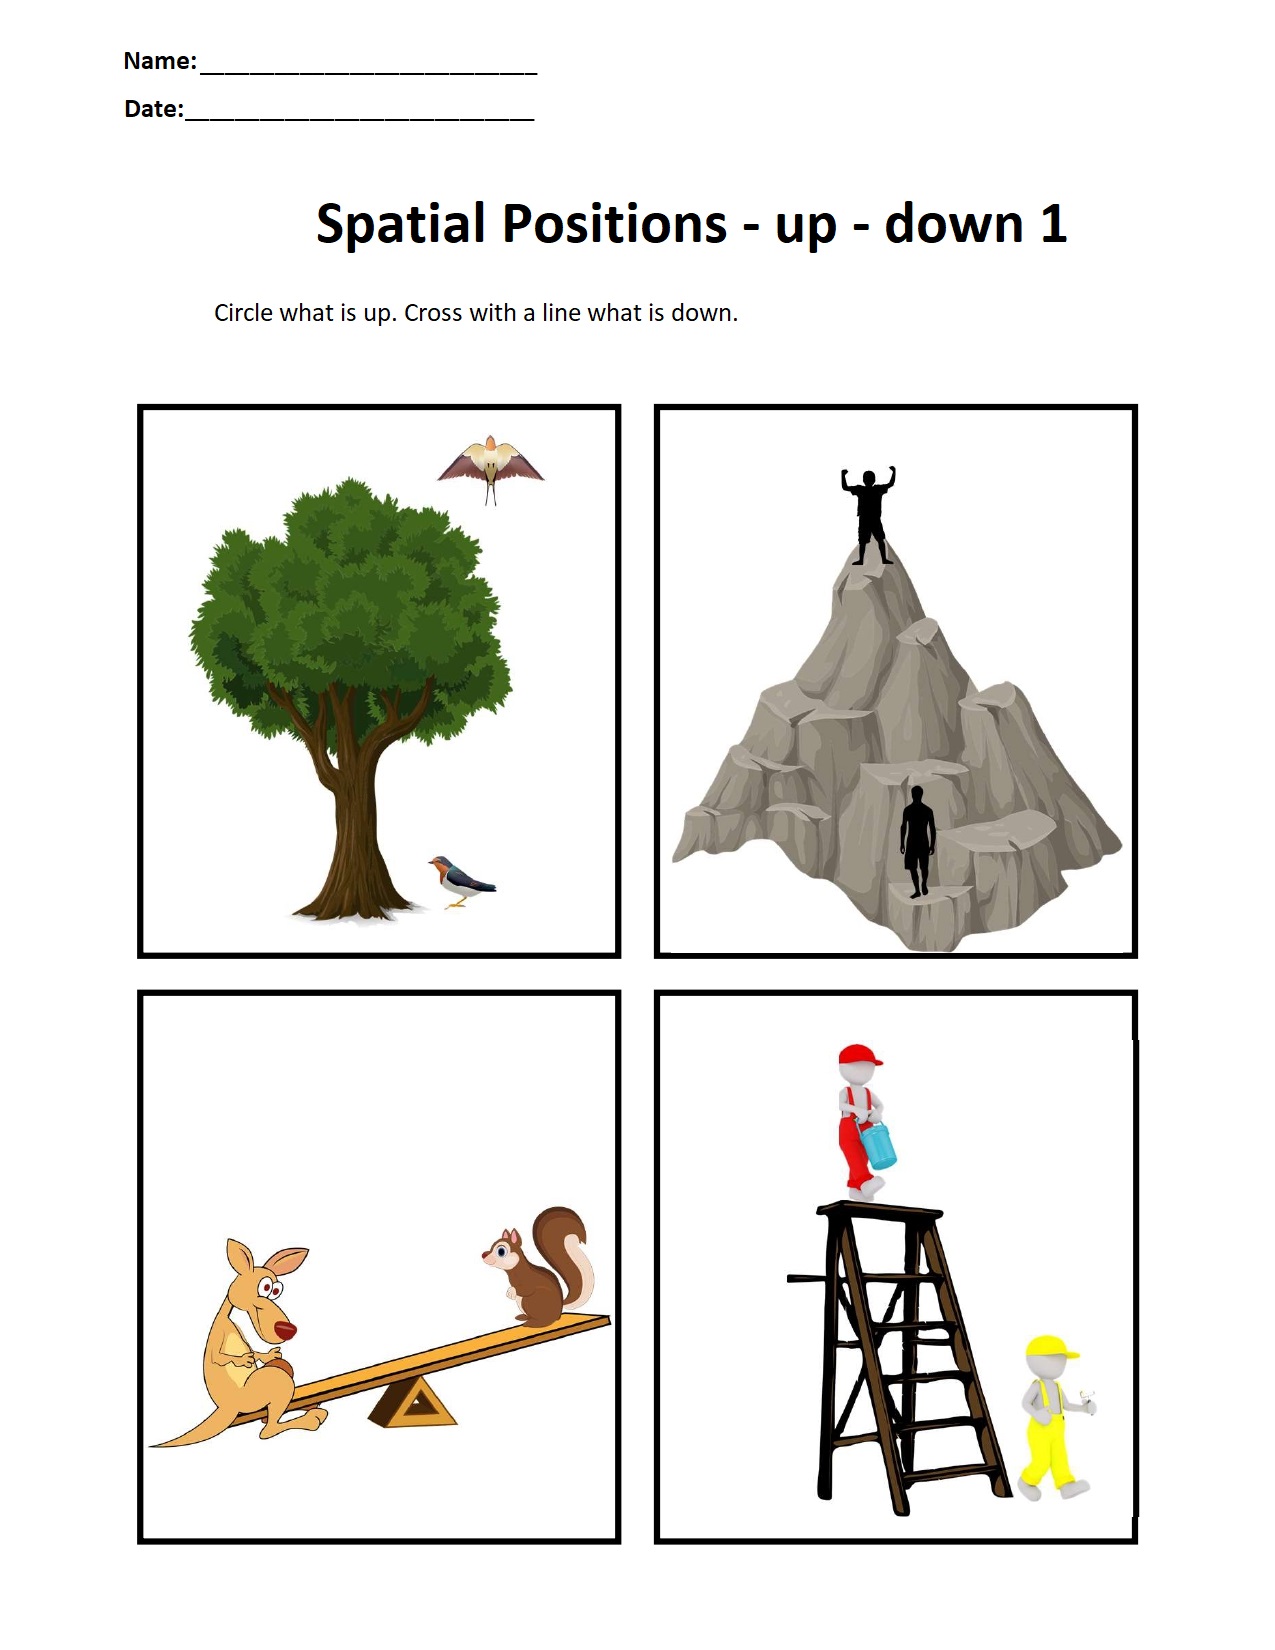 Spatial Positions - up - down 1.jpg